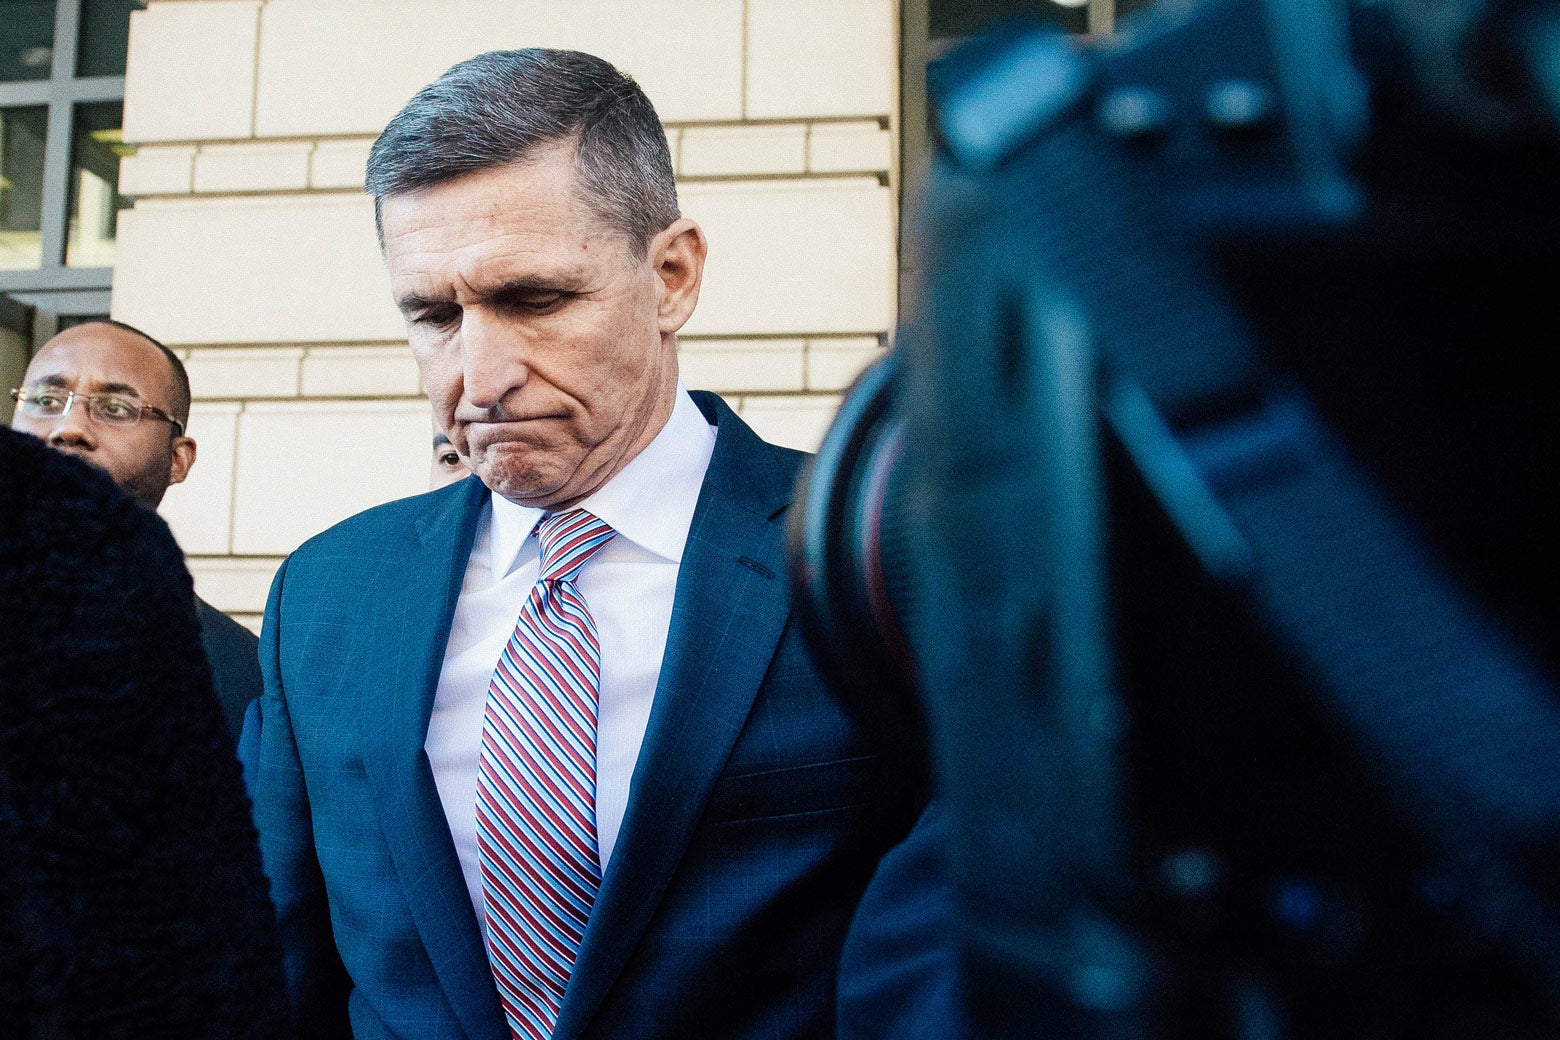 Michael Flynn leaves after the delay in his sentencing hearing in Washington on Tuesday.